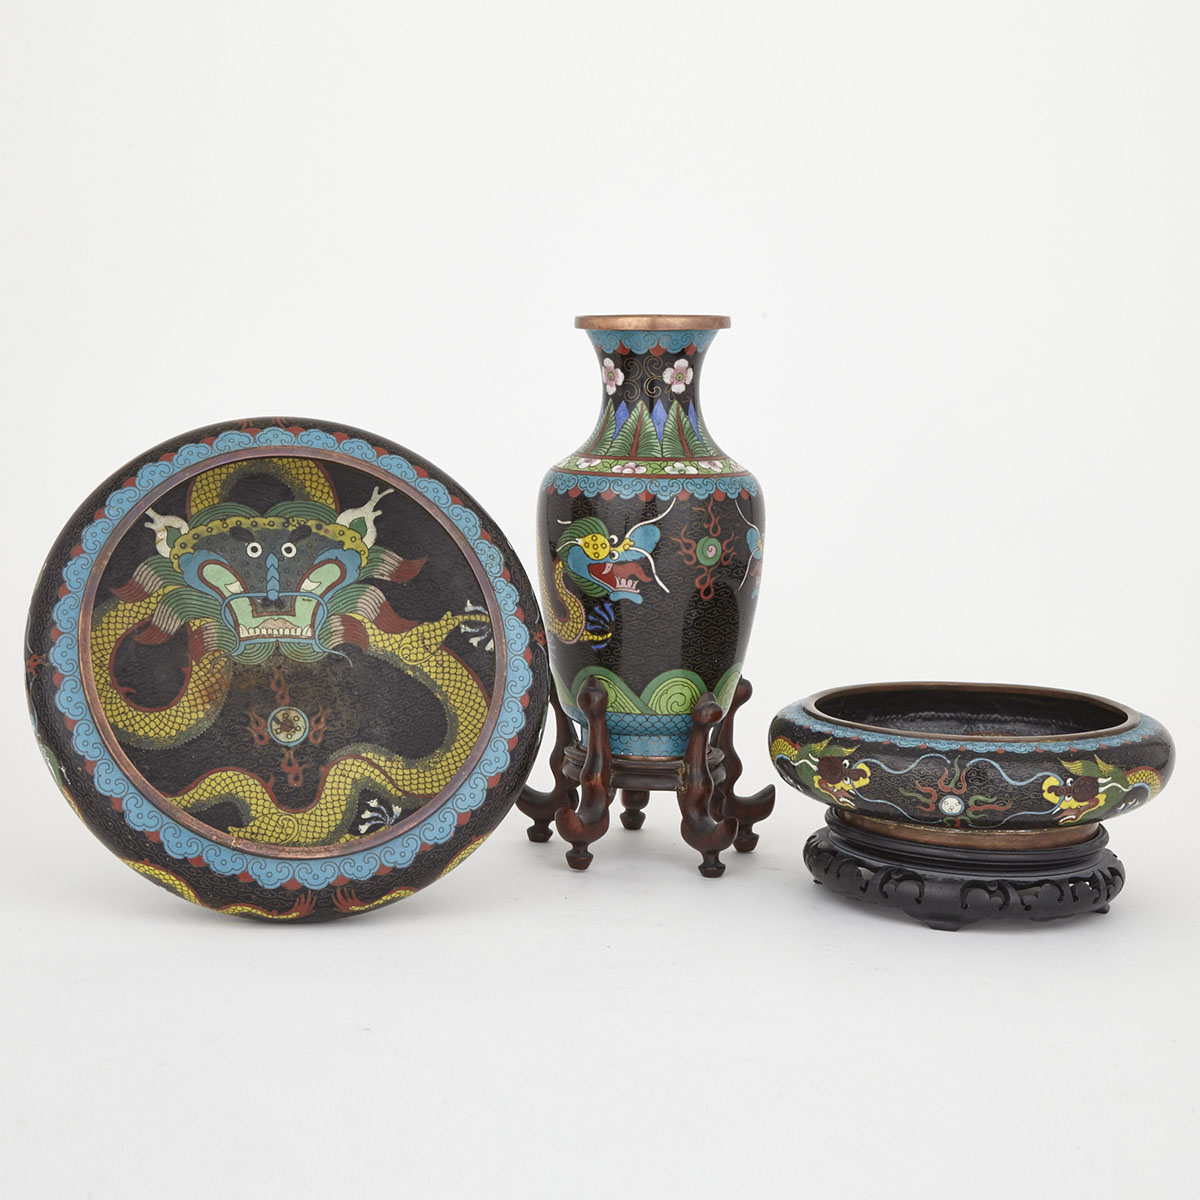 Three Cloisonne Vessels, Early 20th Century